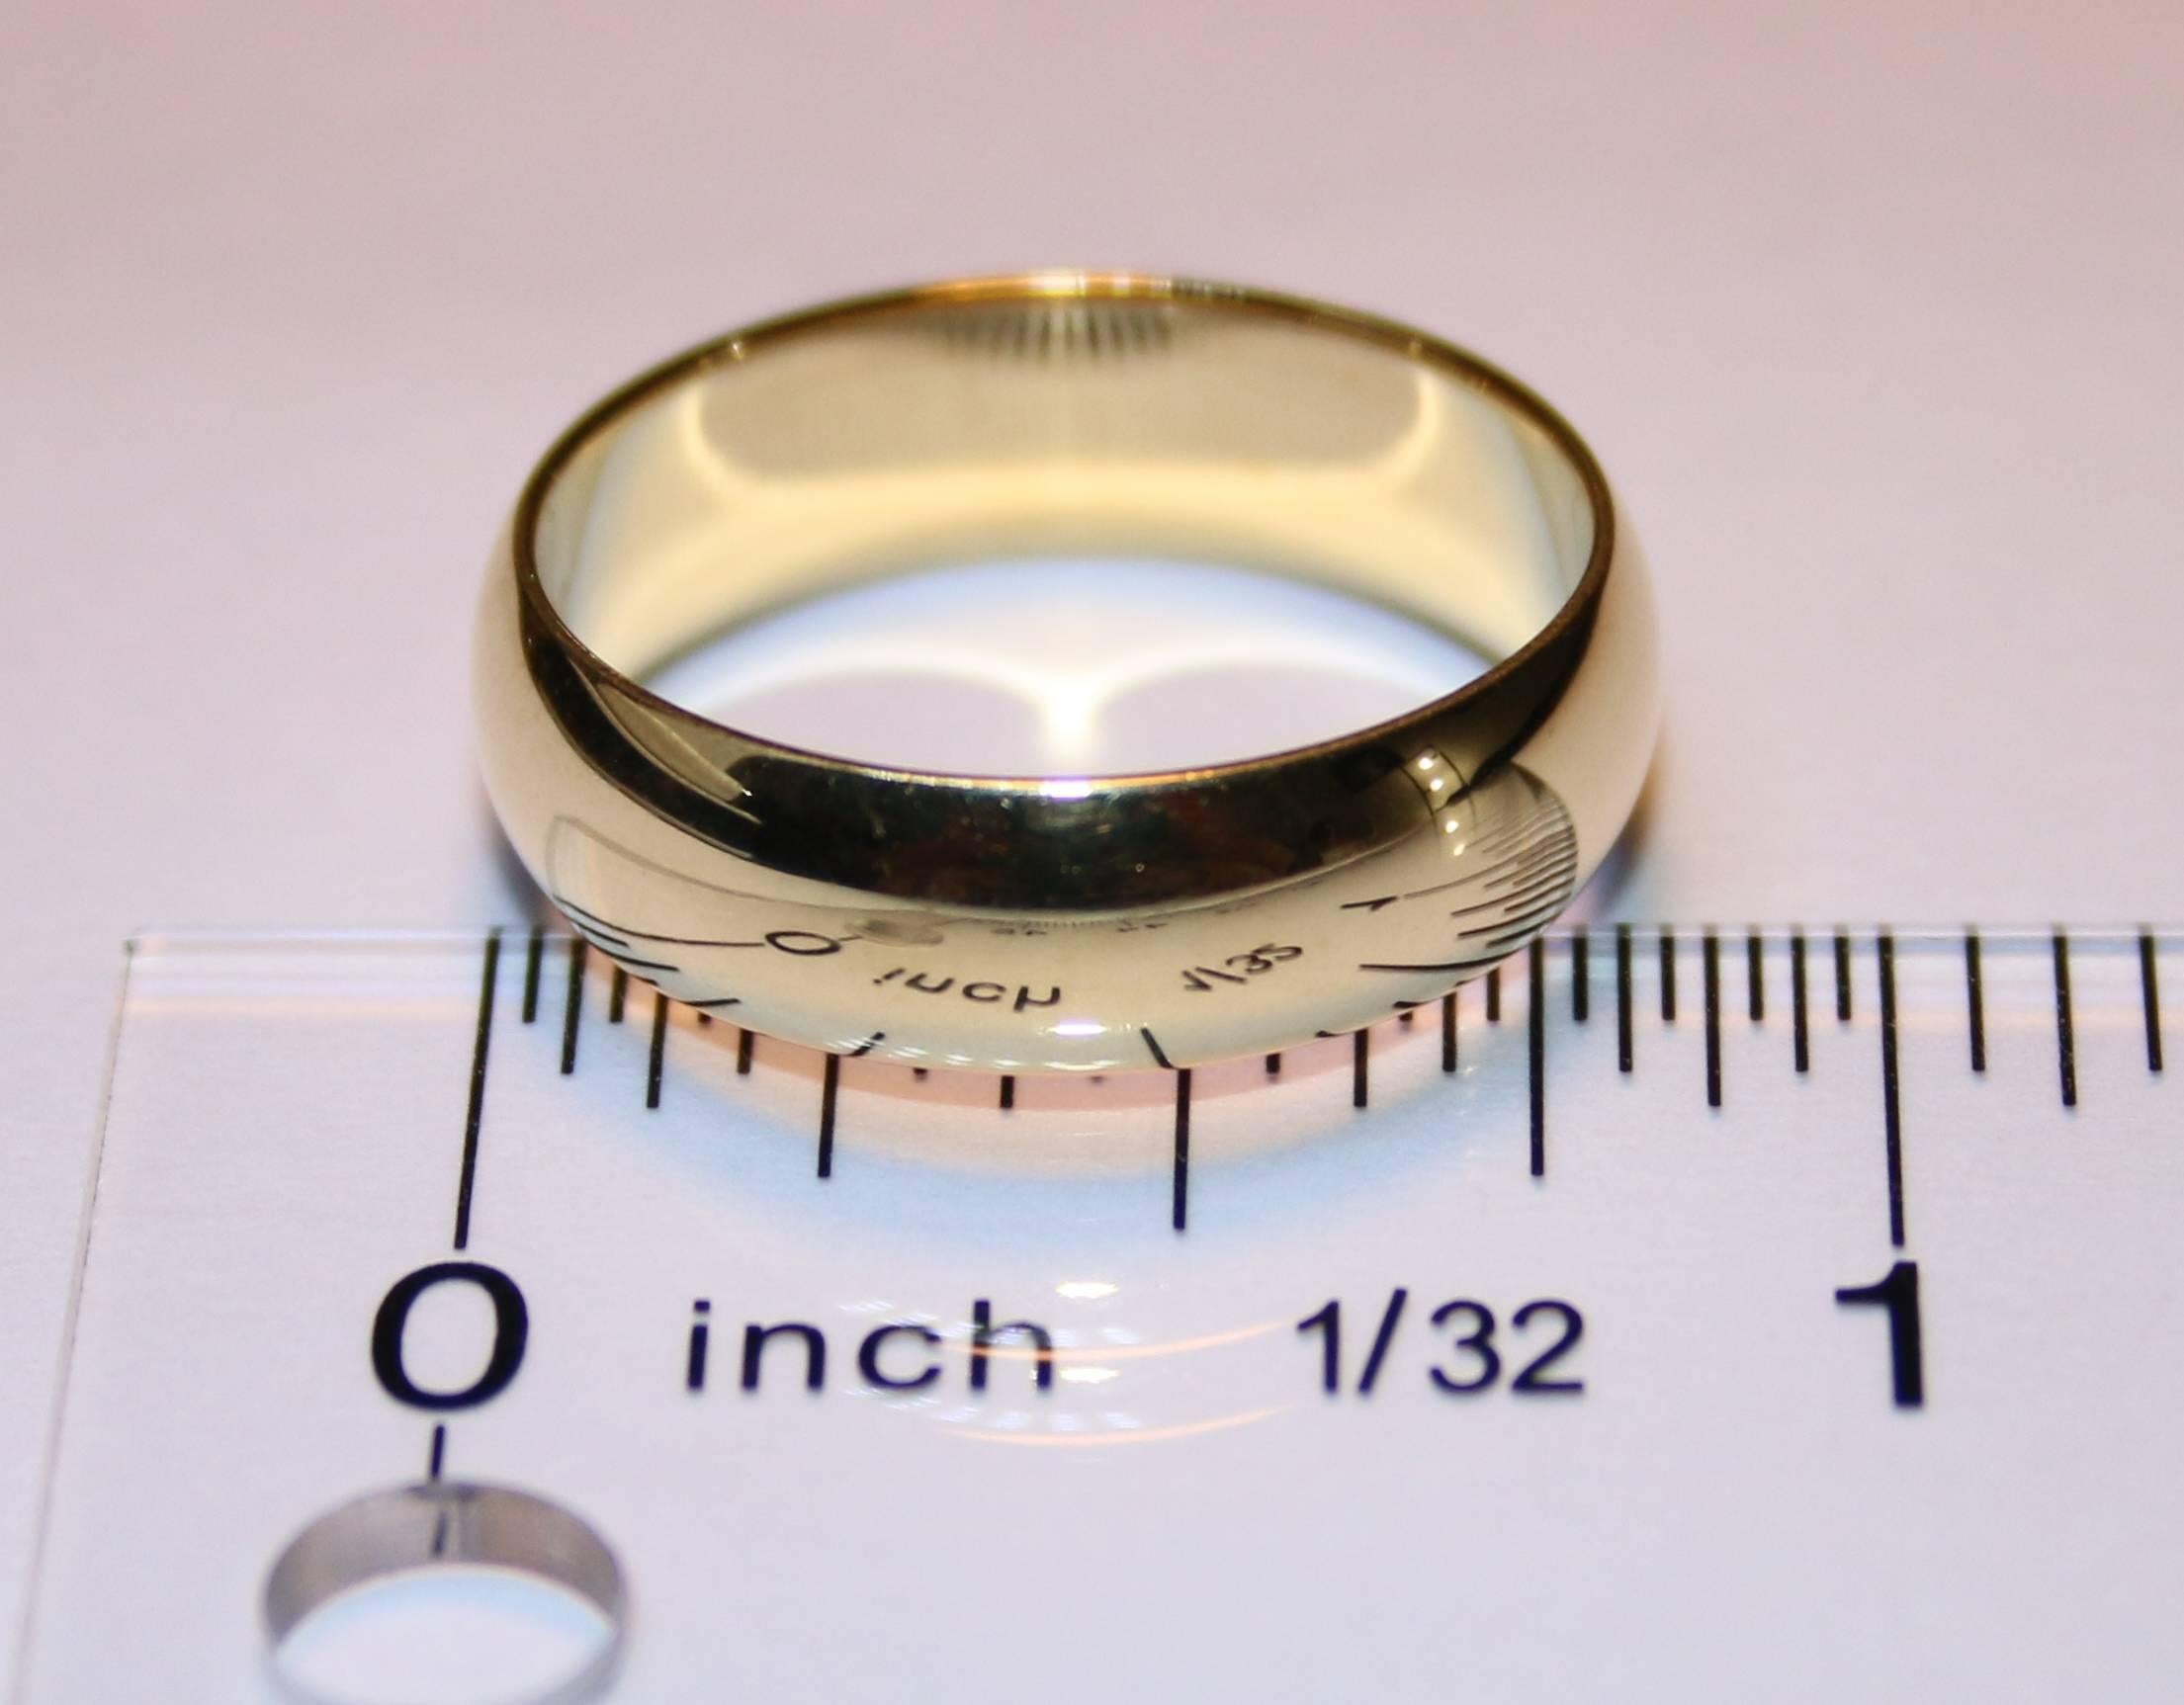 The wedding band is 18K Yellow Gold.
The band is 6.0mm wide.
The ring is a size 9, sizable.
The ring weighs 6.5 grams